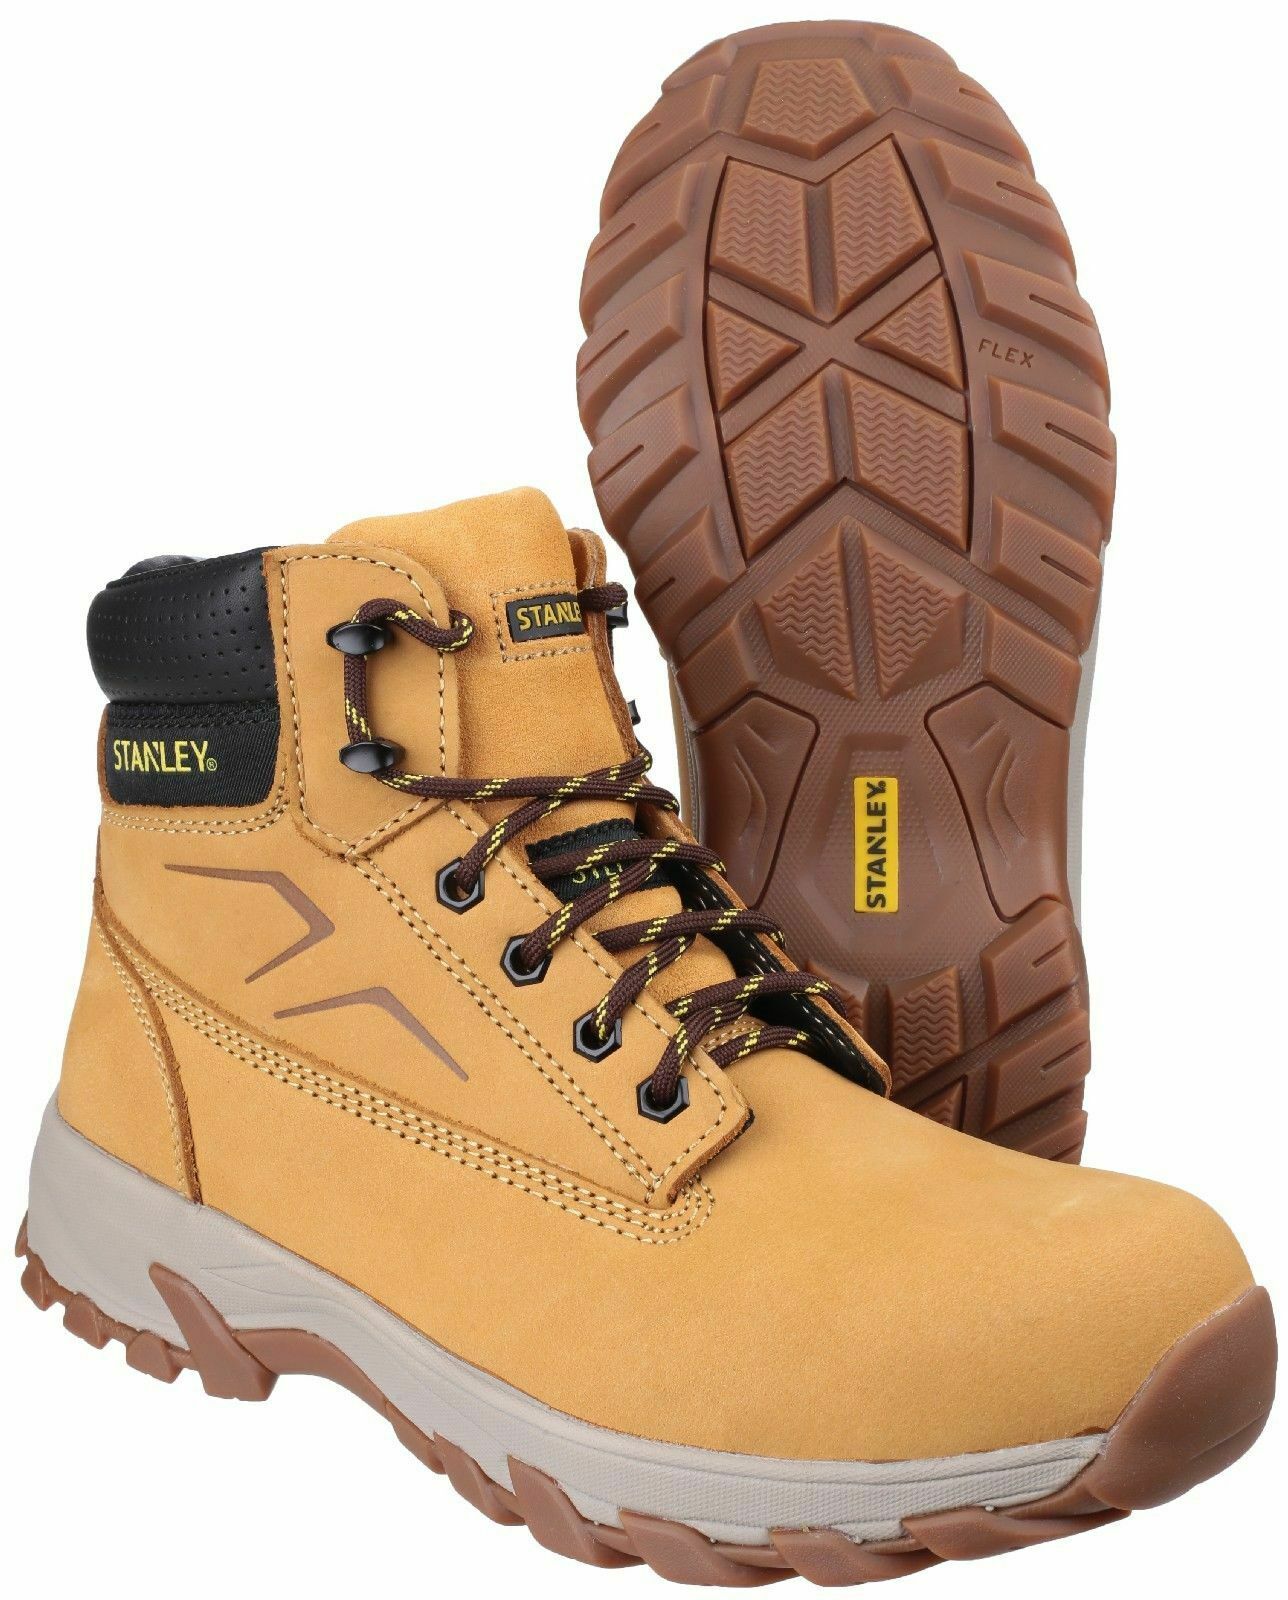 Stanley Tradesman Brown & Honey Leather Safety Work Hiking Boot Steel Toe SB-P